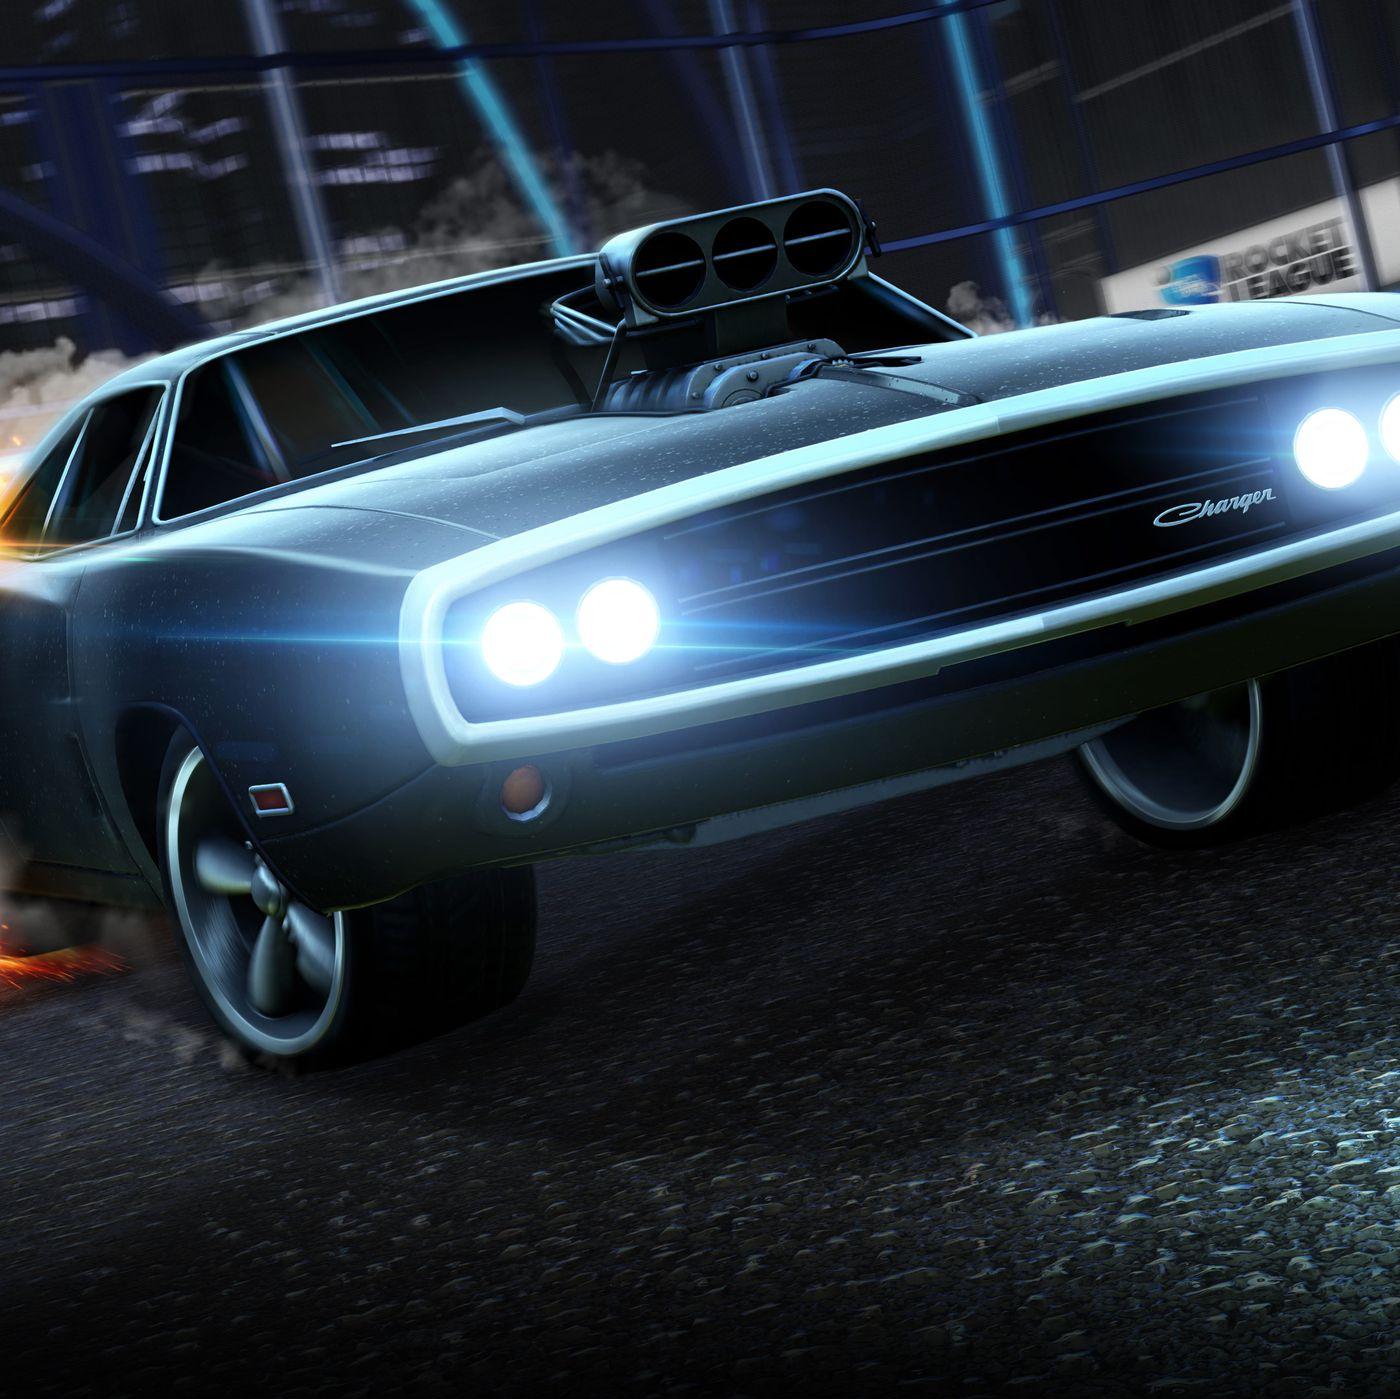 Doms car from Fast Furious coming to Rocket League   Polygon